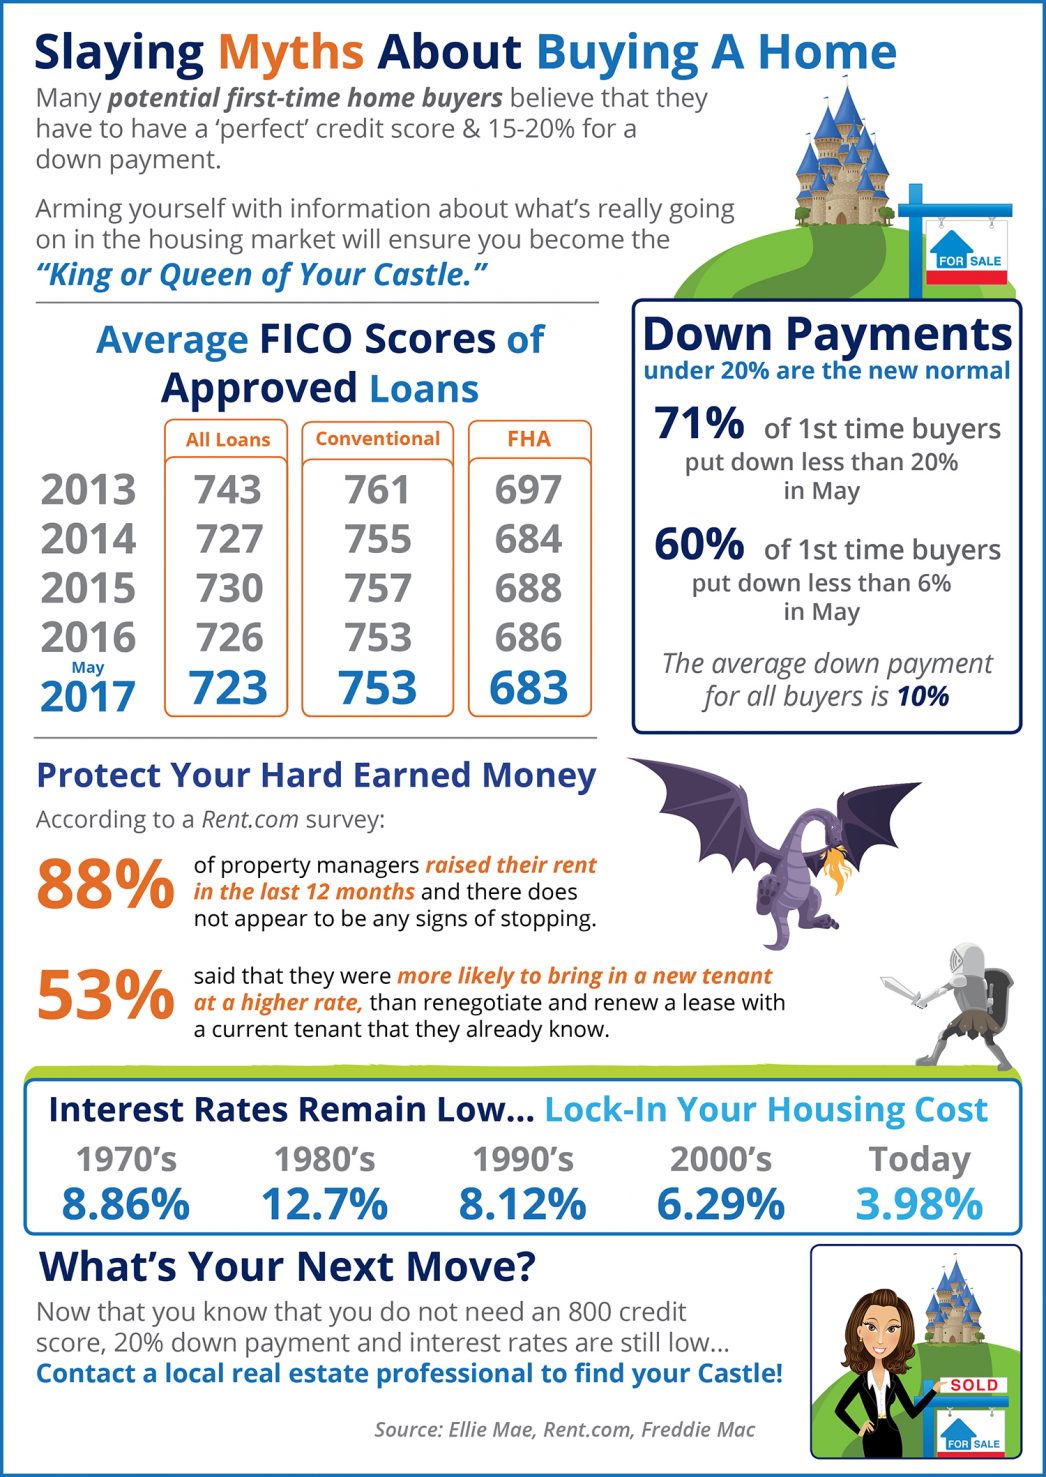 Home Buying Myths Slayed [INFOGRAPHIC] | MyKCM